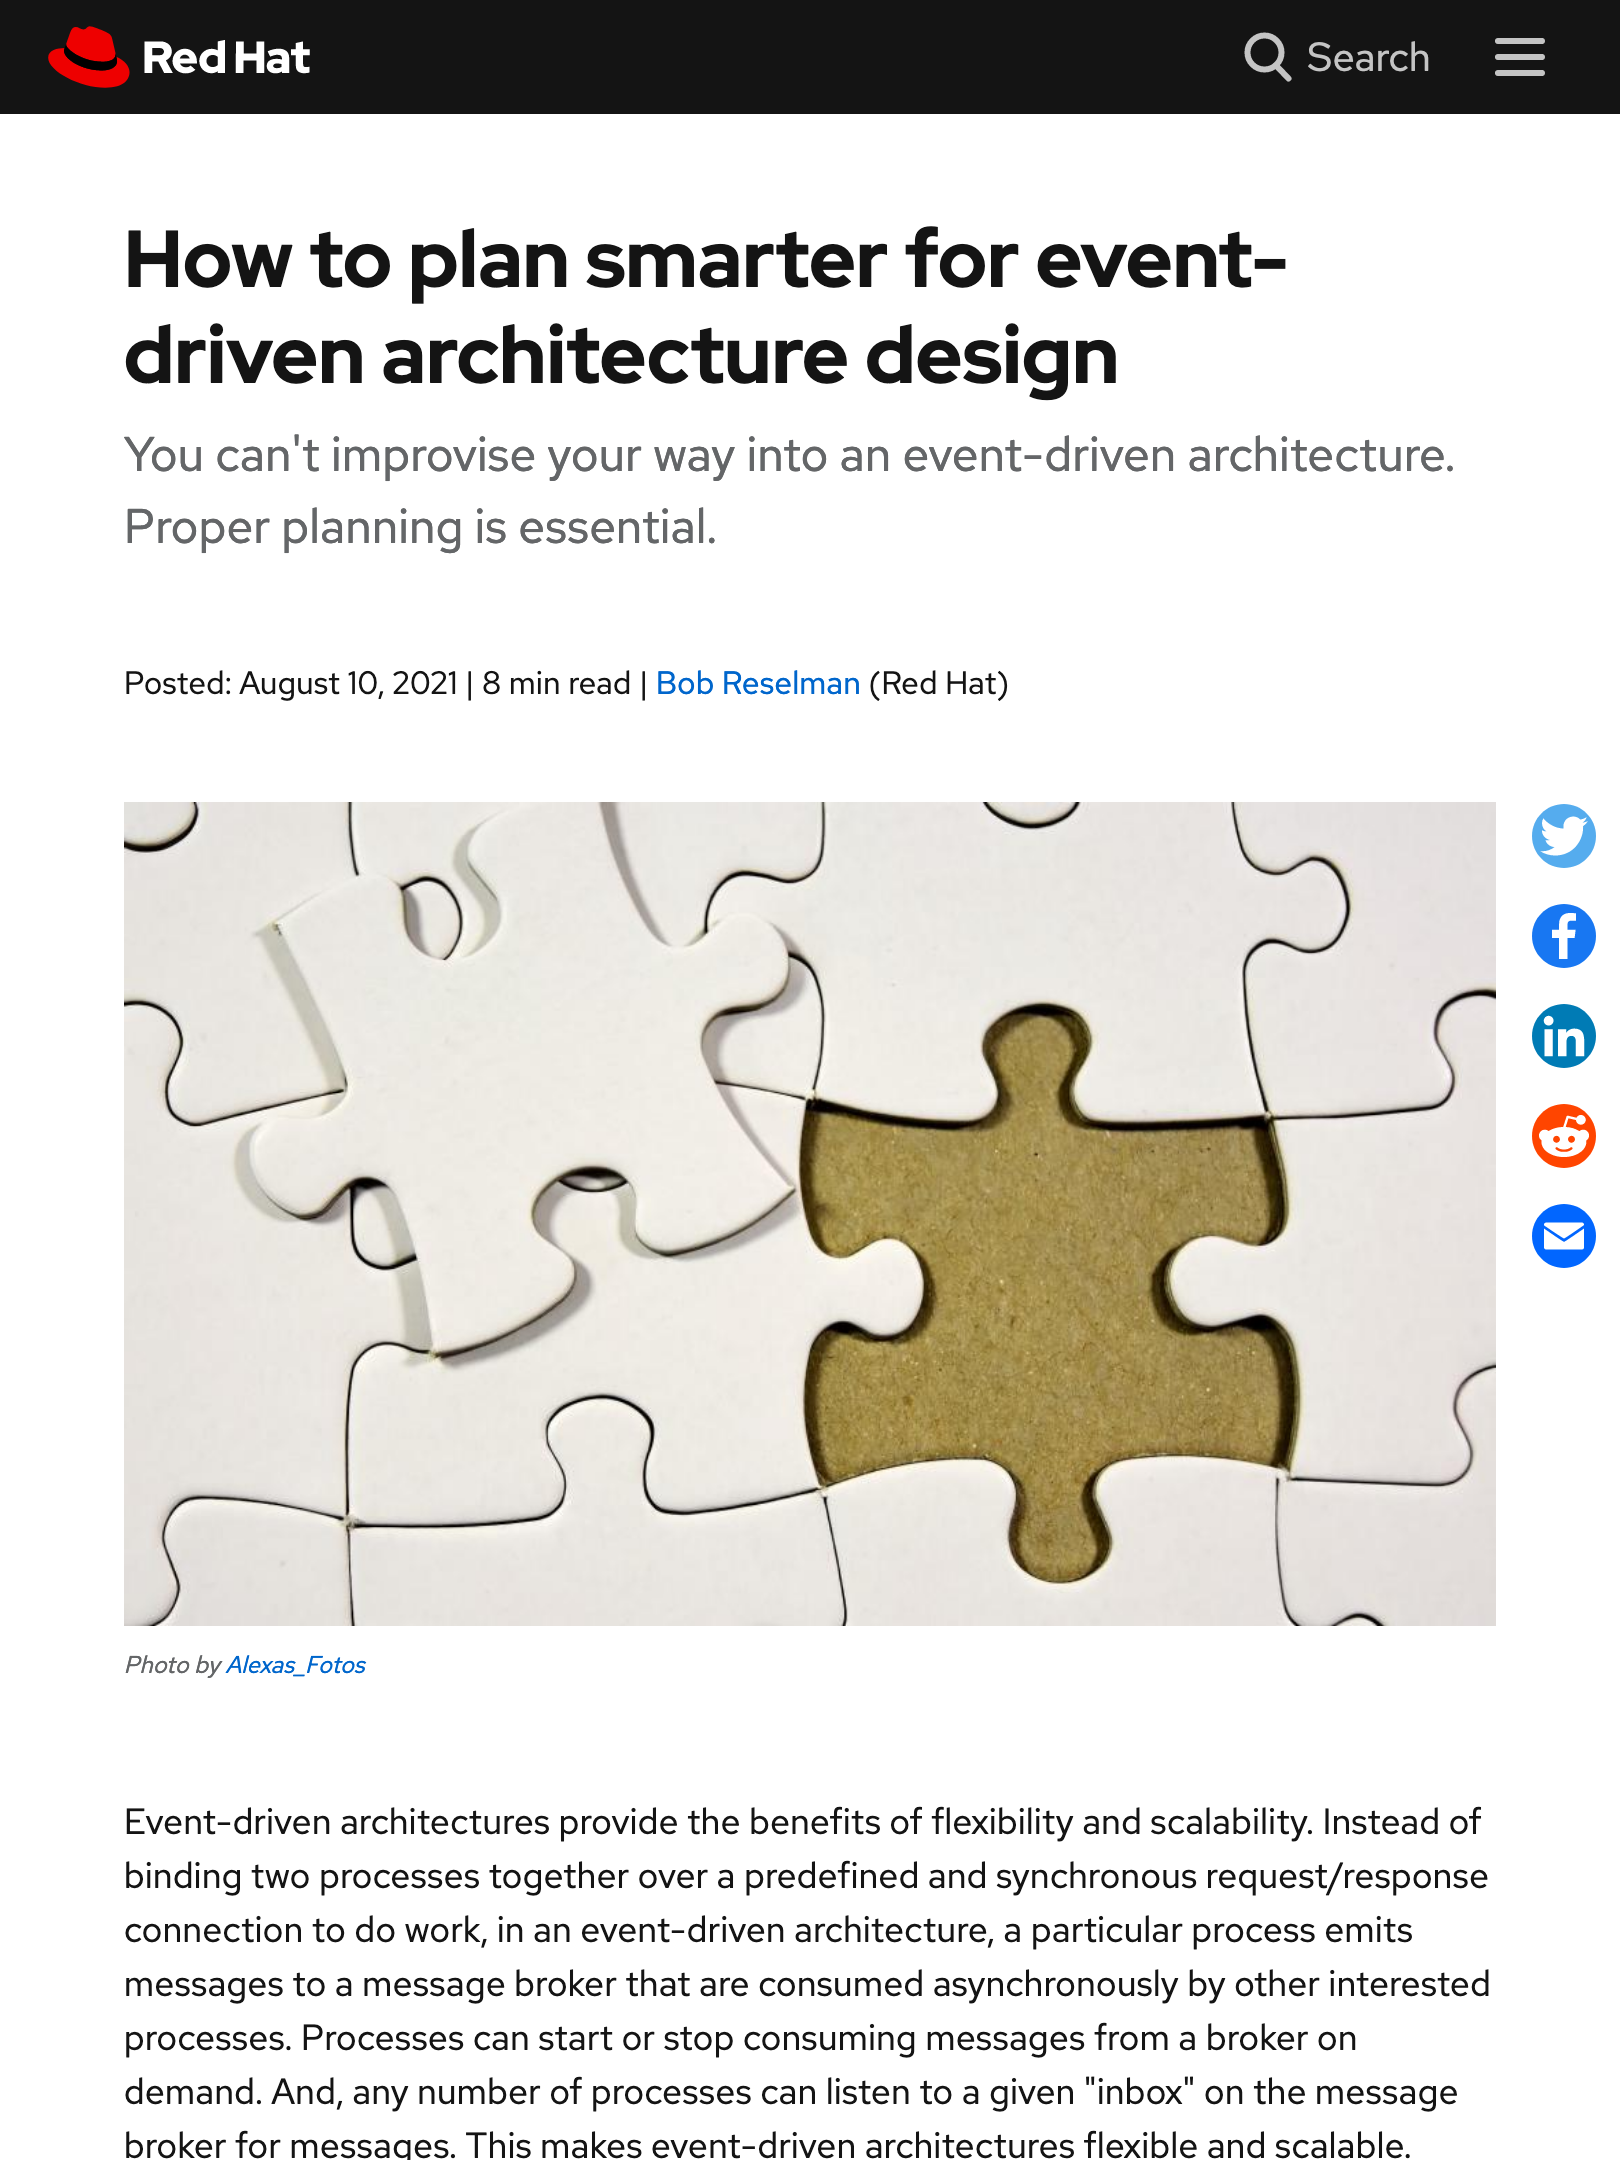 screenshot of article titled "How to plan smarter for event-driven architecture design"